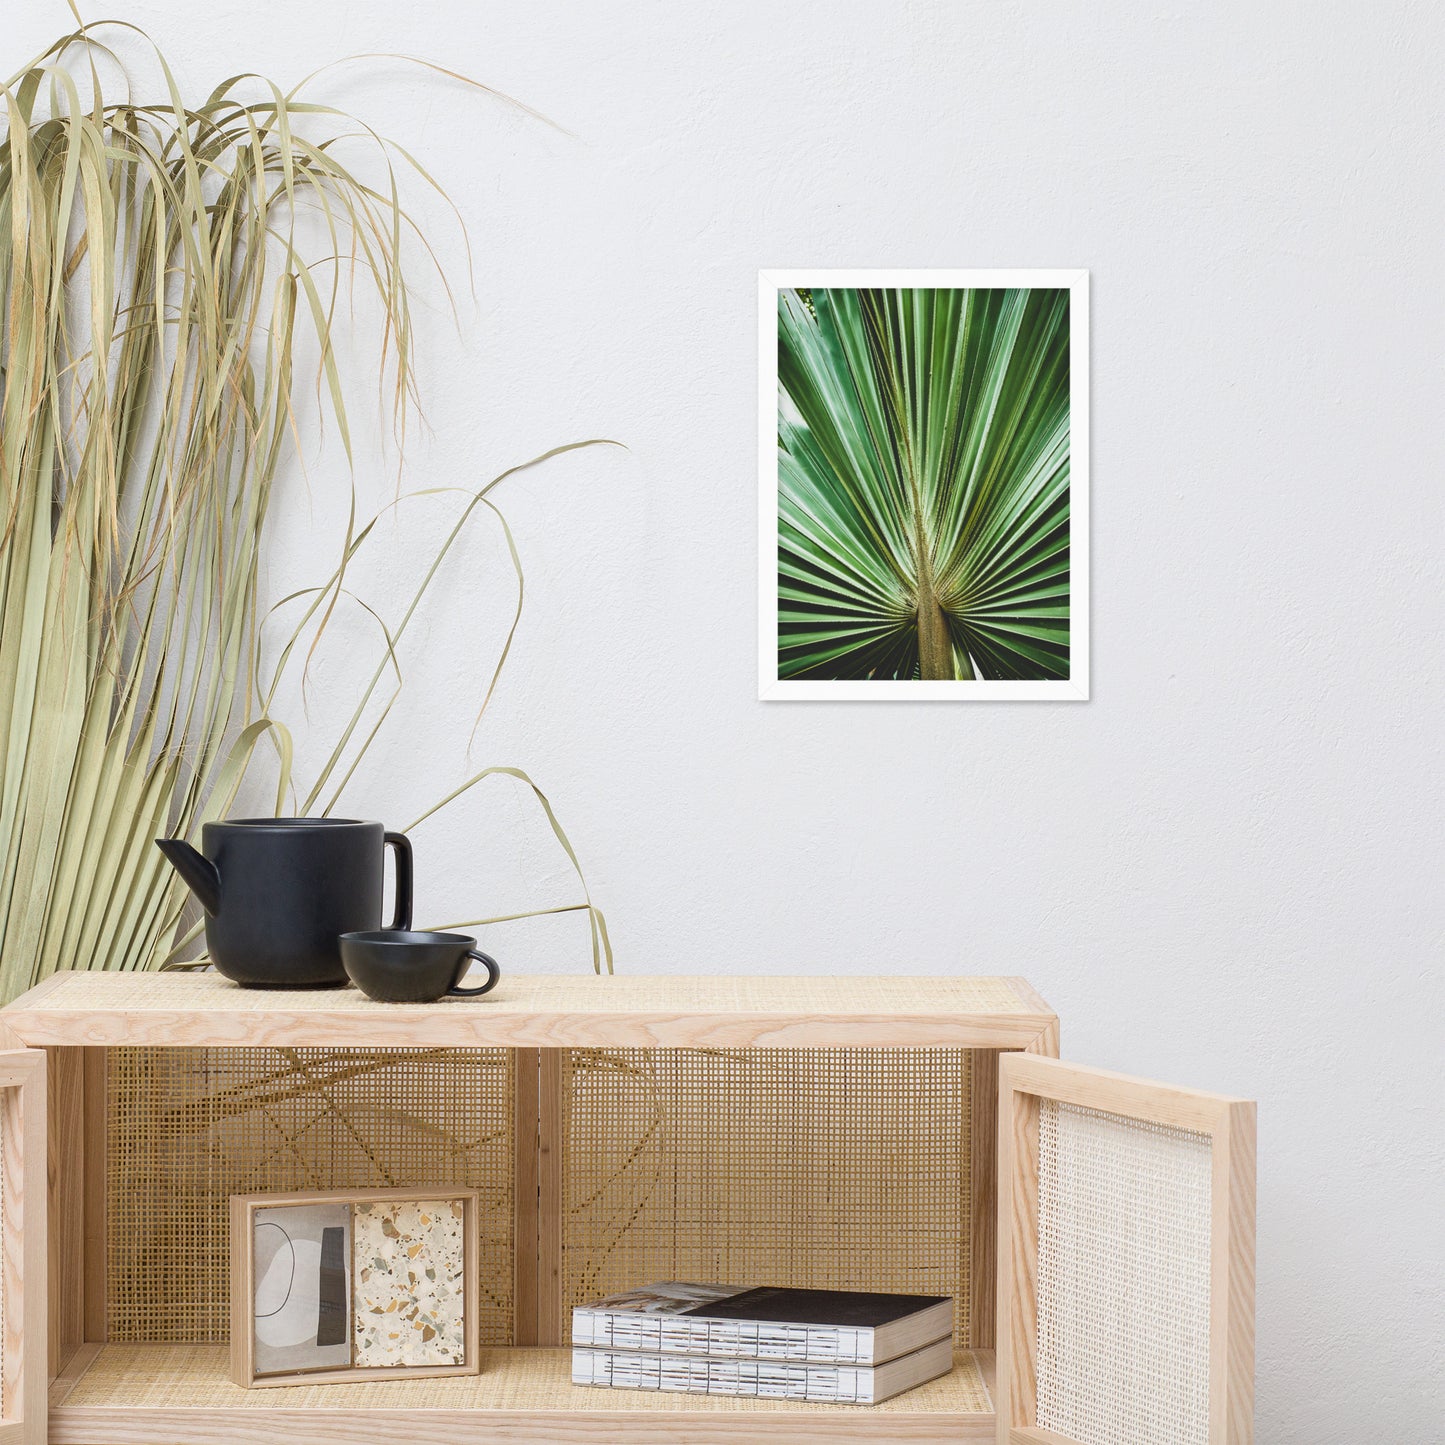 Rustic Dining Wall Decor: Aged and Colorized Wide Palm Leaves 2 Tropical Botanical / Nature Photo Framed Wall Art Print - Artwork - Wall Decor